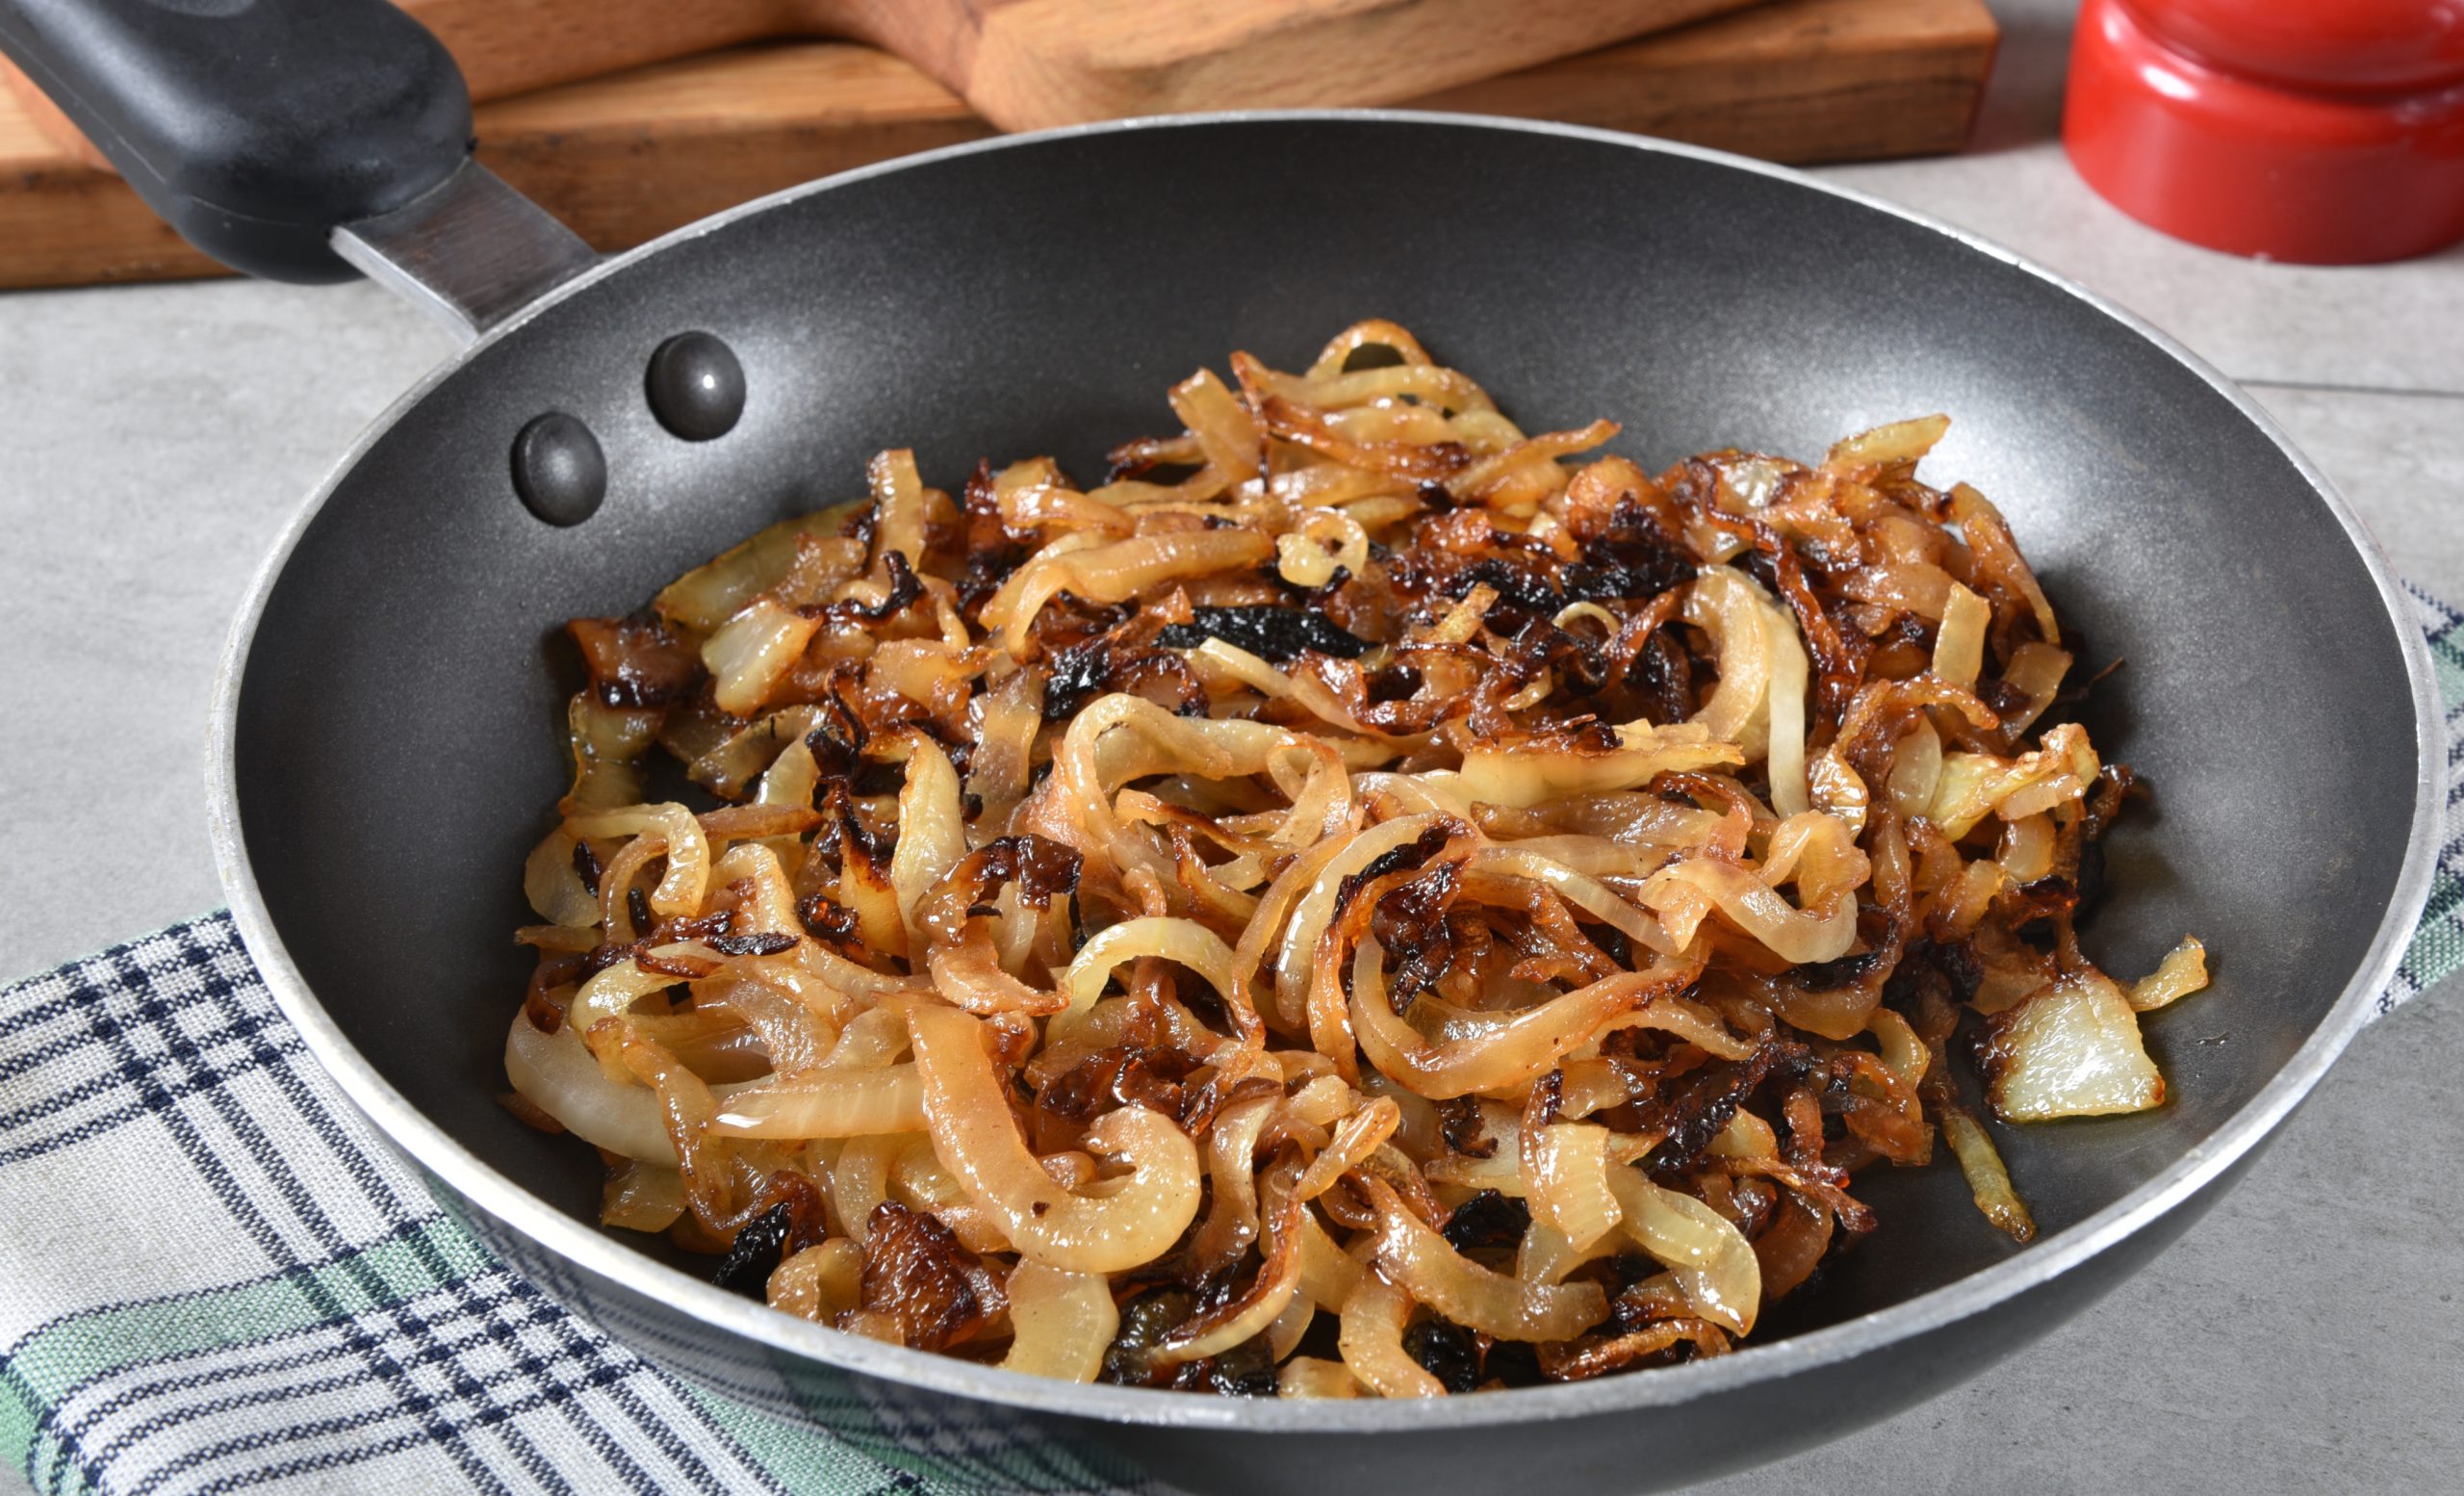 Caramelized Onions Recipe in a frying pan with a wooden spoon.